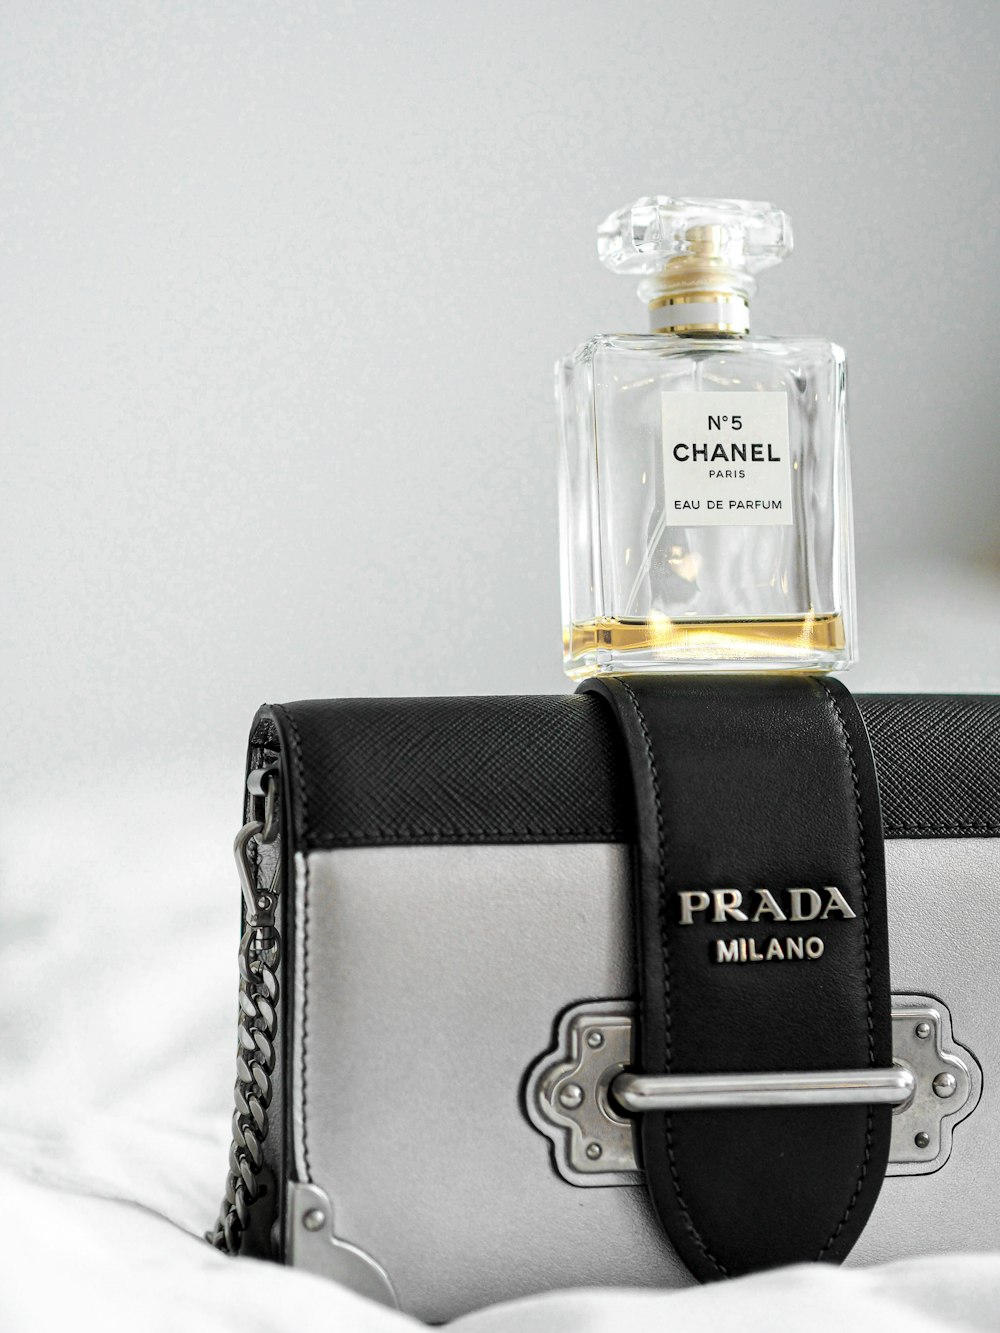 black and gold perfume bottle in black leather bag